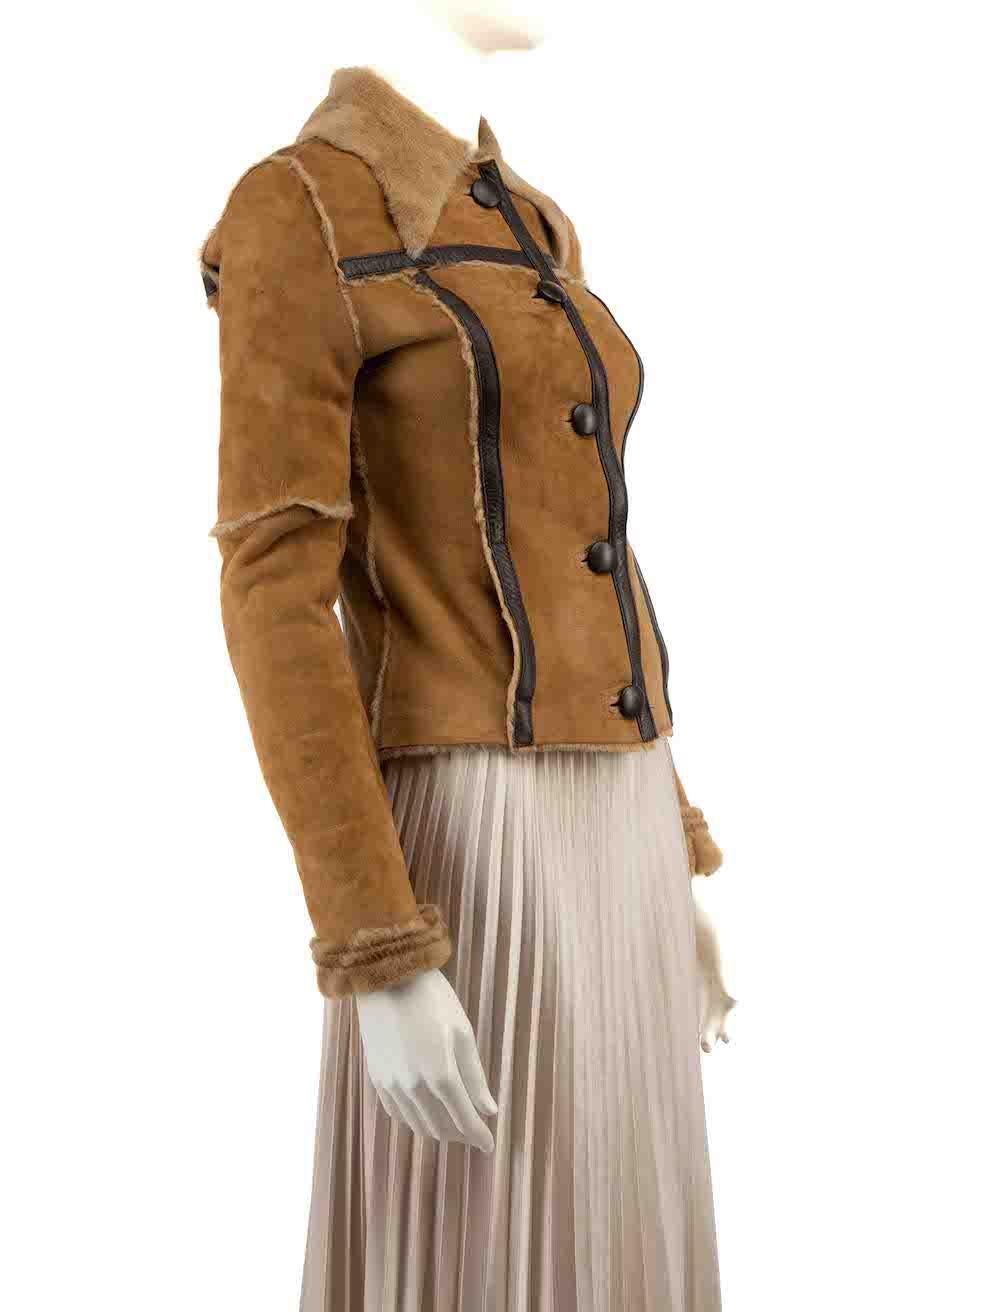 CONDITION is Good. General wear to jacket is evident. Moderate signs of wear to the front, back and sleeves with marks to the suede and buttons on this used D&G designer resale item.
 
 
 
 Details
 
 
 Vintage
 
 Brown
 
 Suede
 
 Jacket
 
